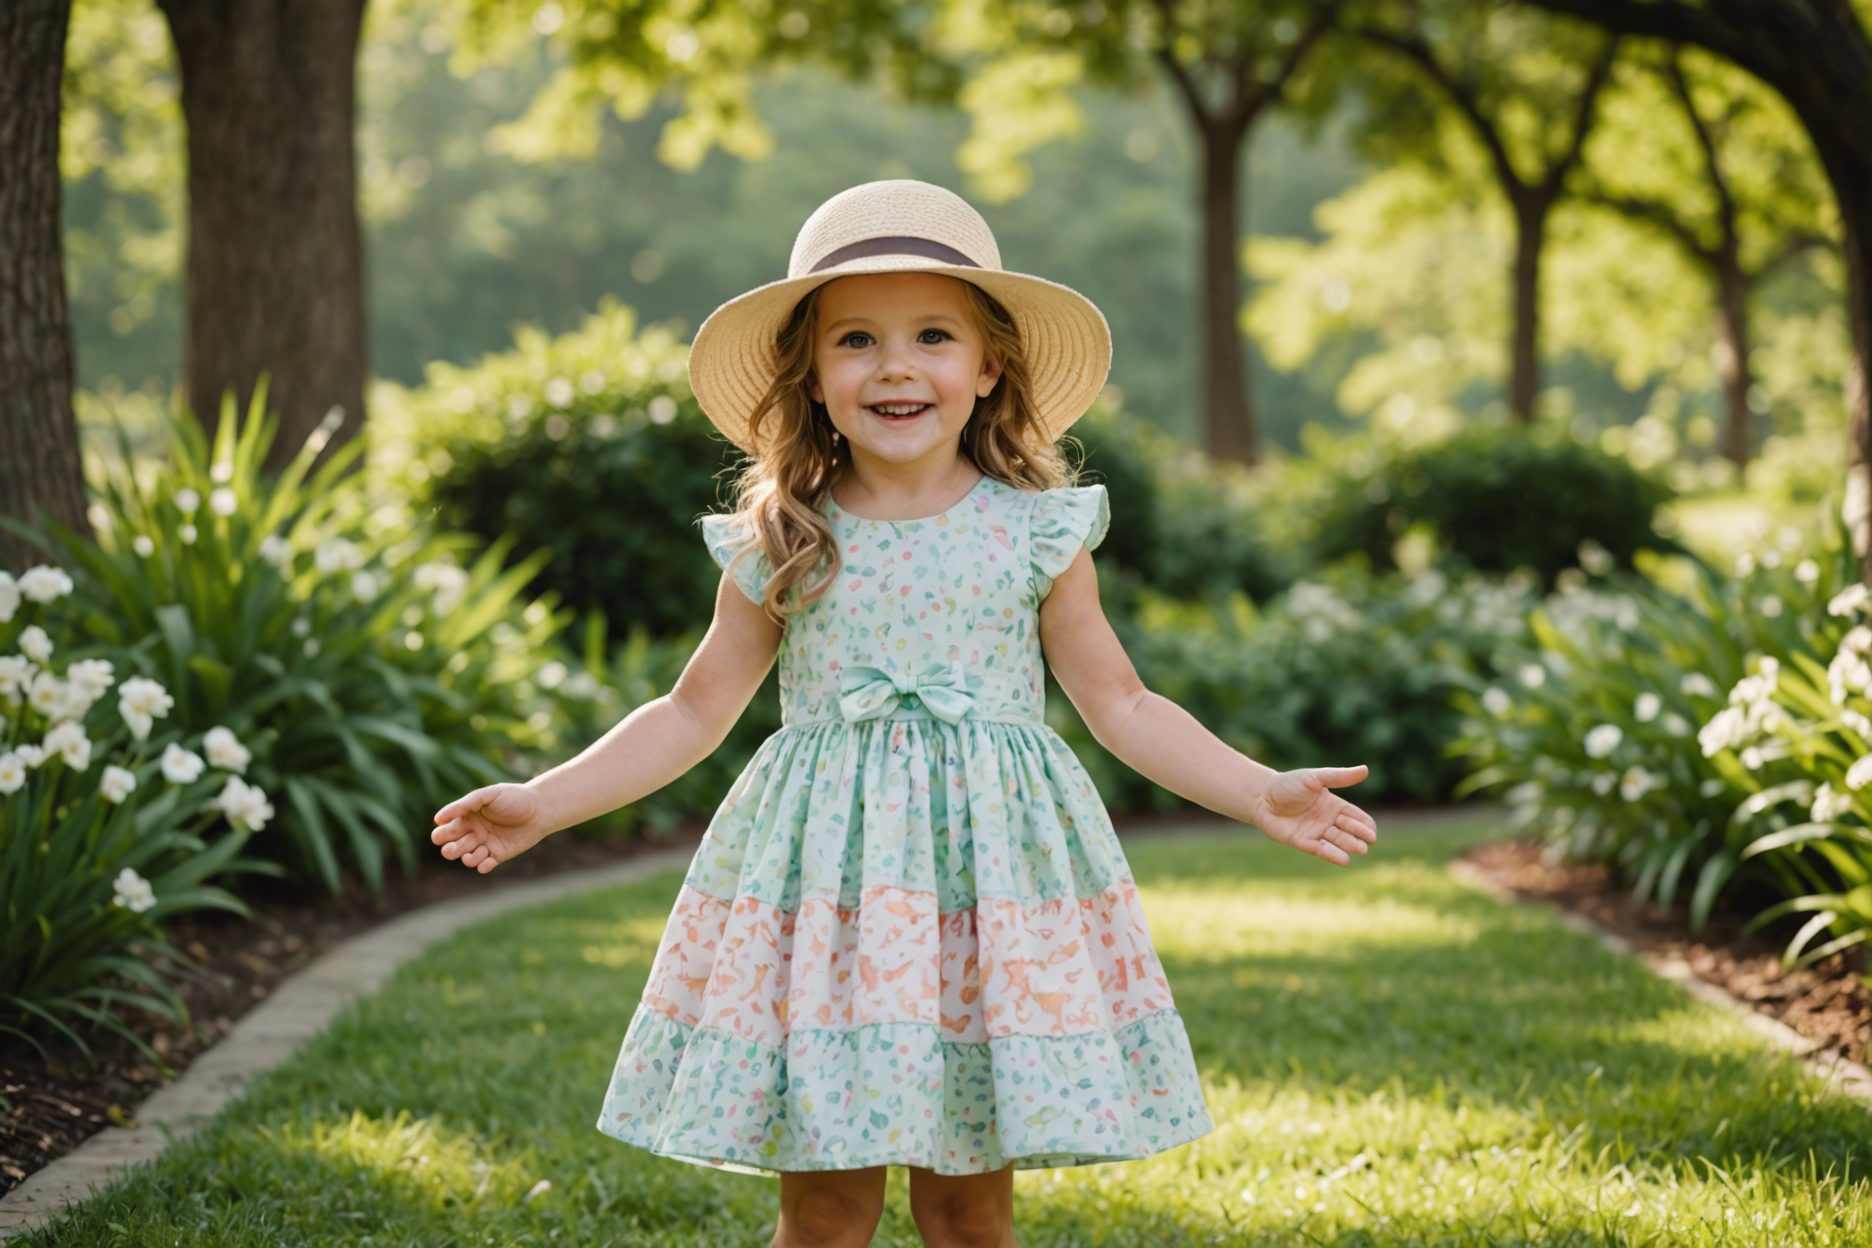 Bebek Clothing: A Comprehensive Guide to Choosing the Best Outfits for Your Little Ones